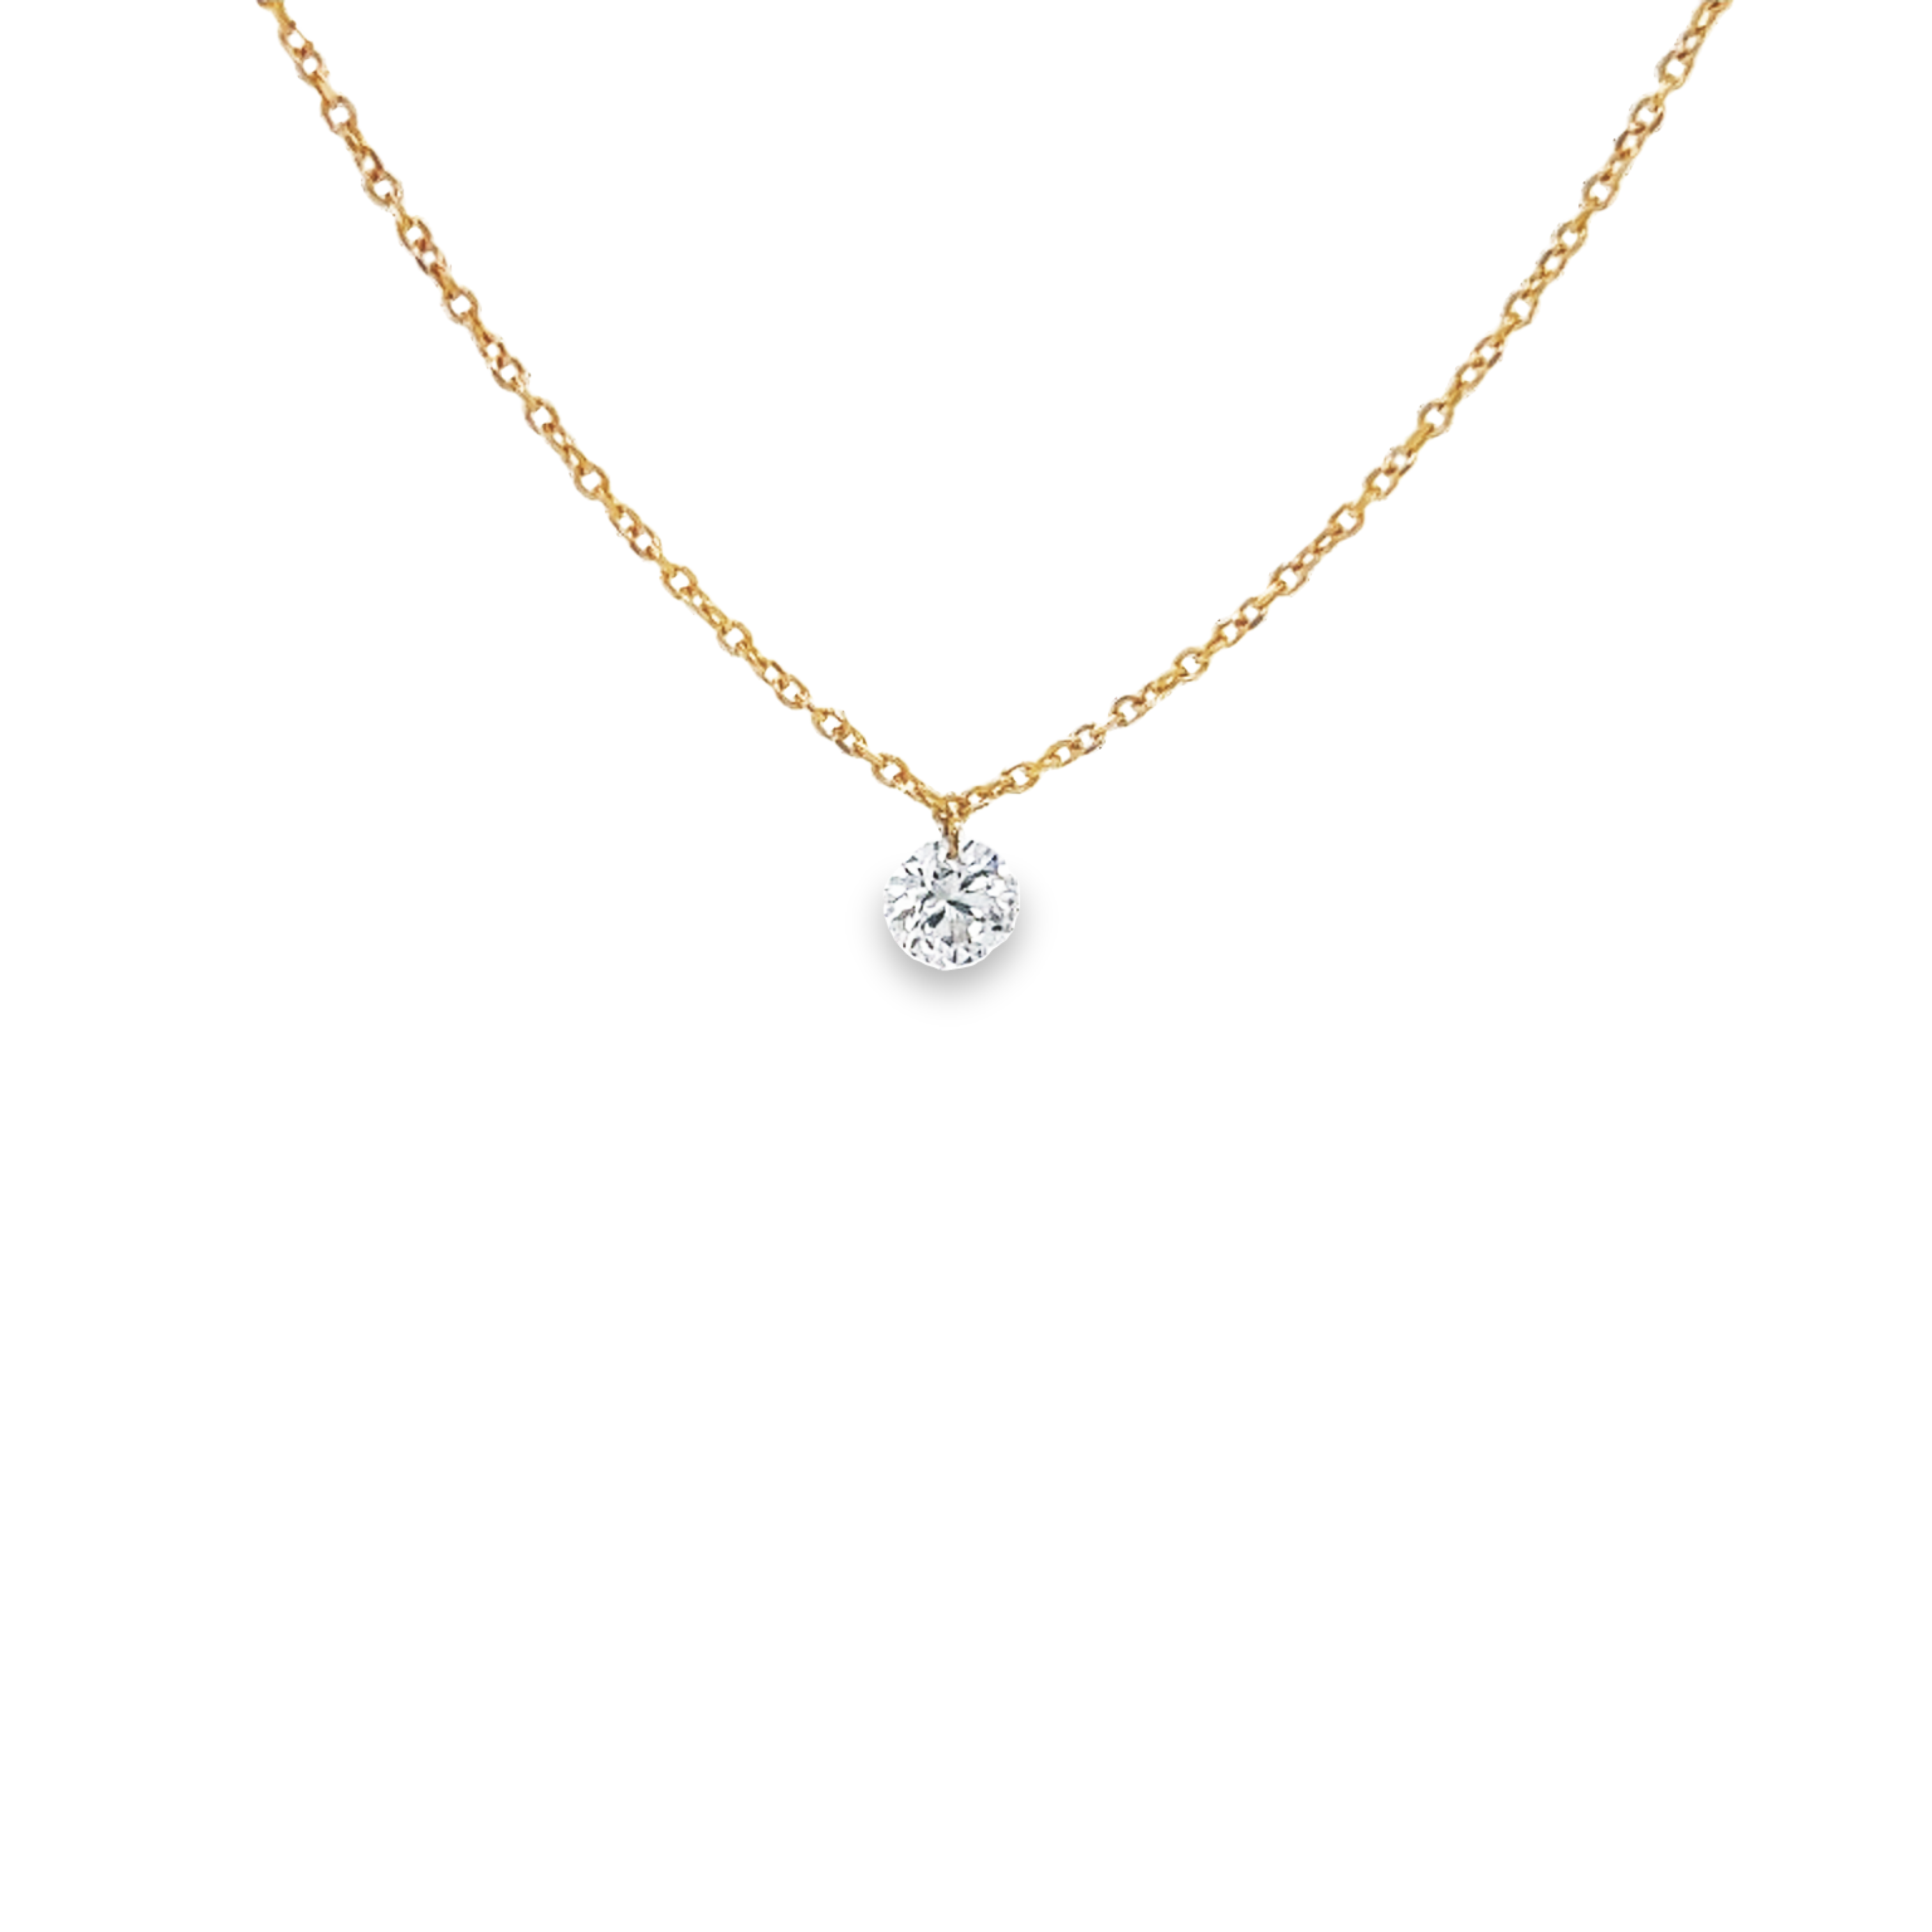 14 Karat yellow gold solitaire necklace with one 0.25ct Round Brilliant G I Diamond